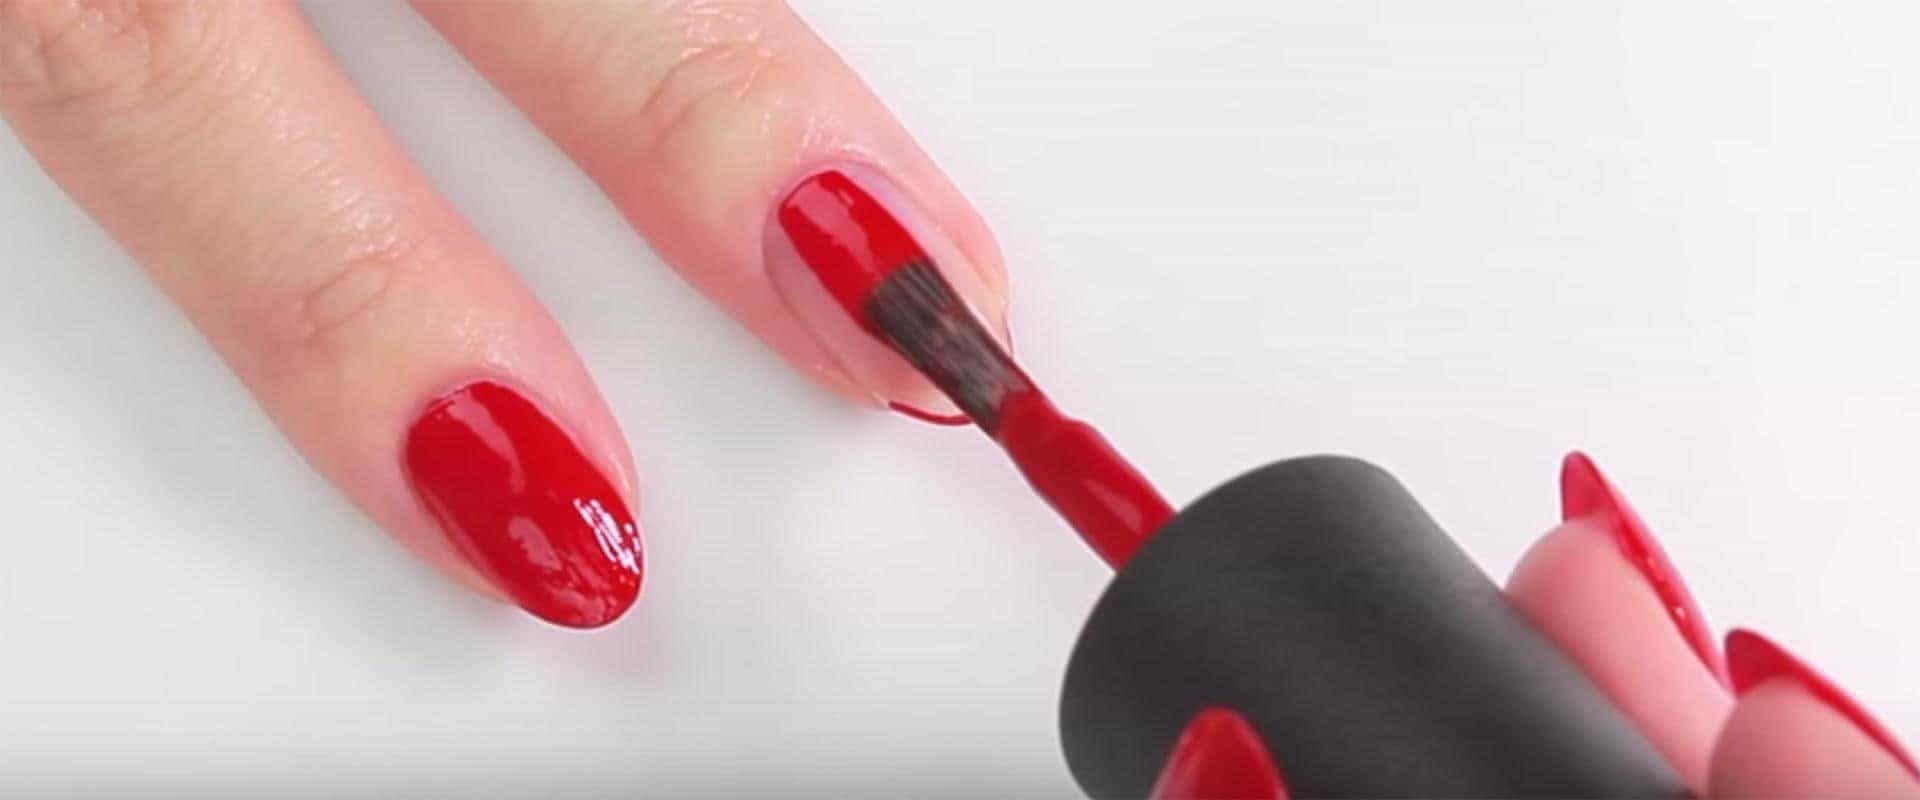 use thin coats and your nail polish drying time will decrease